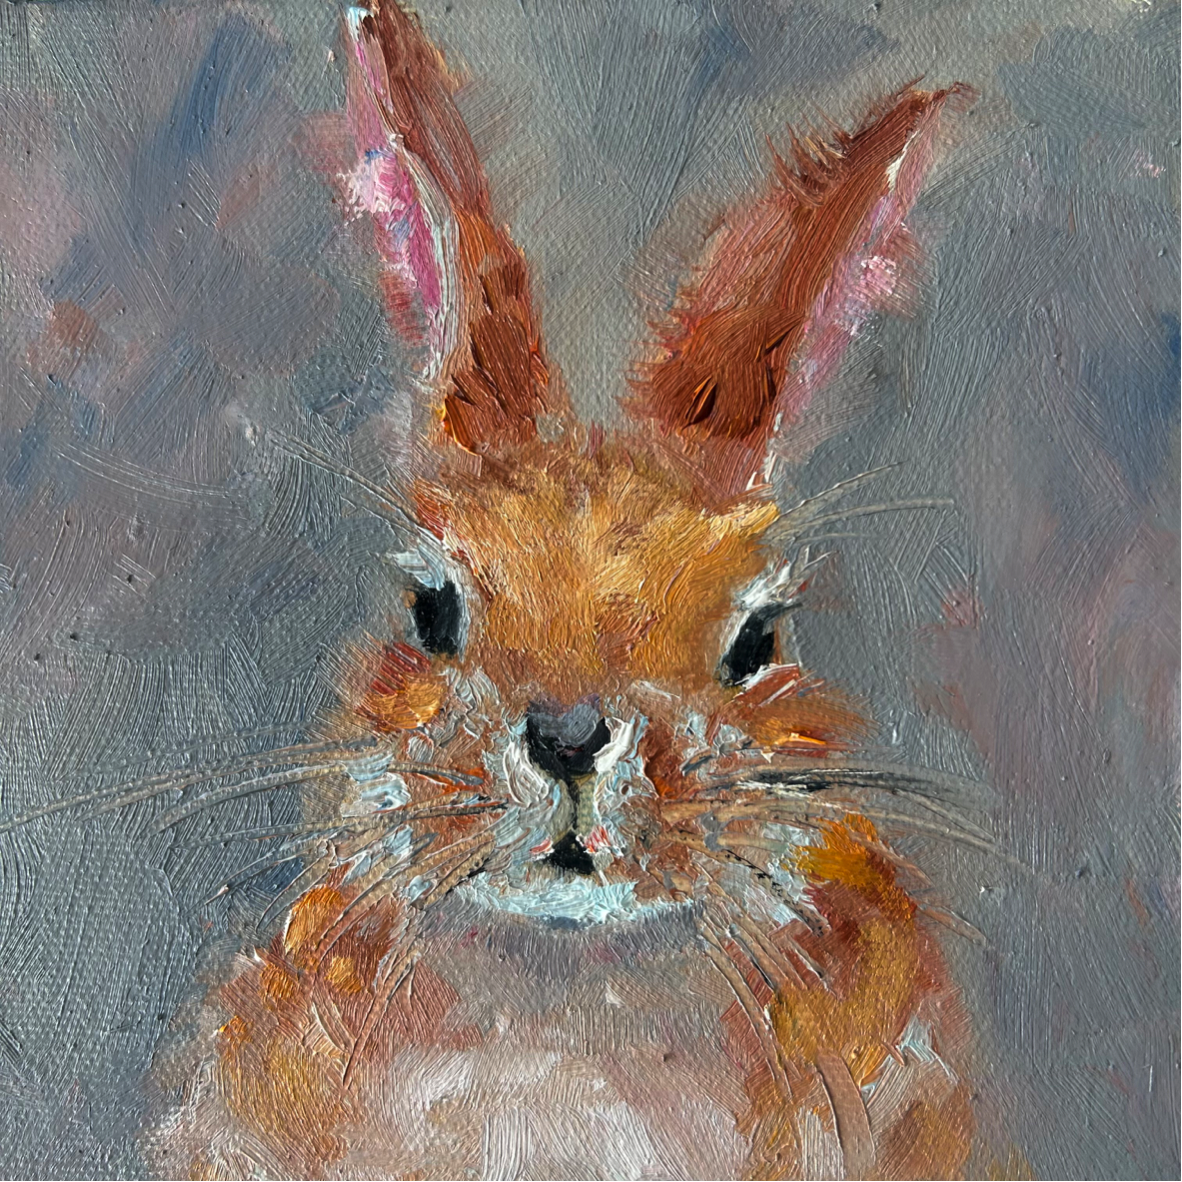 The Trickster, Bunny 